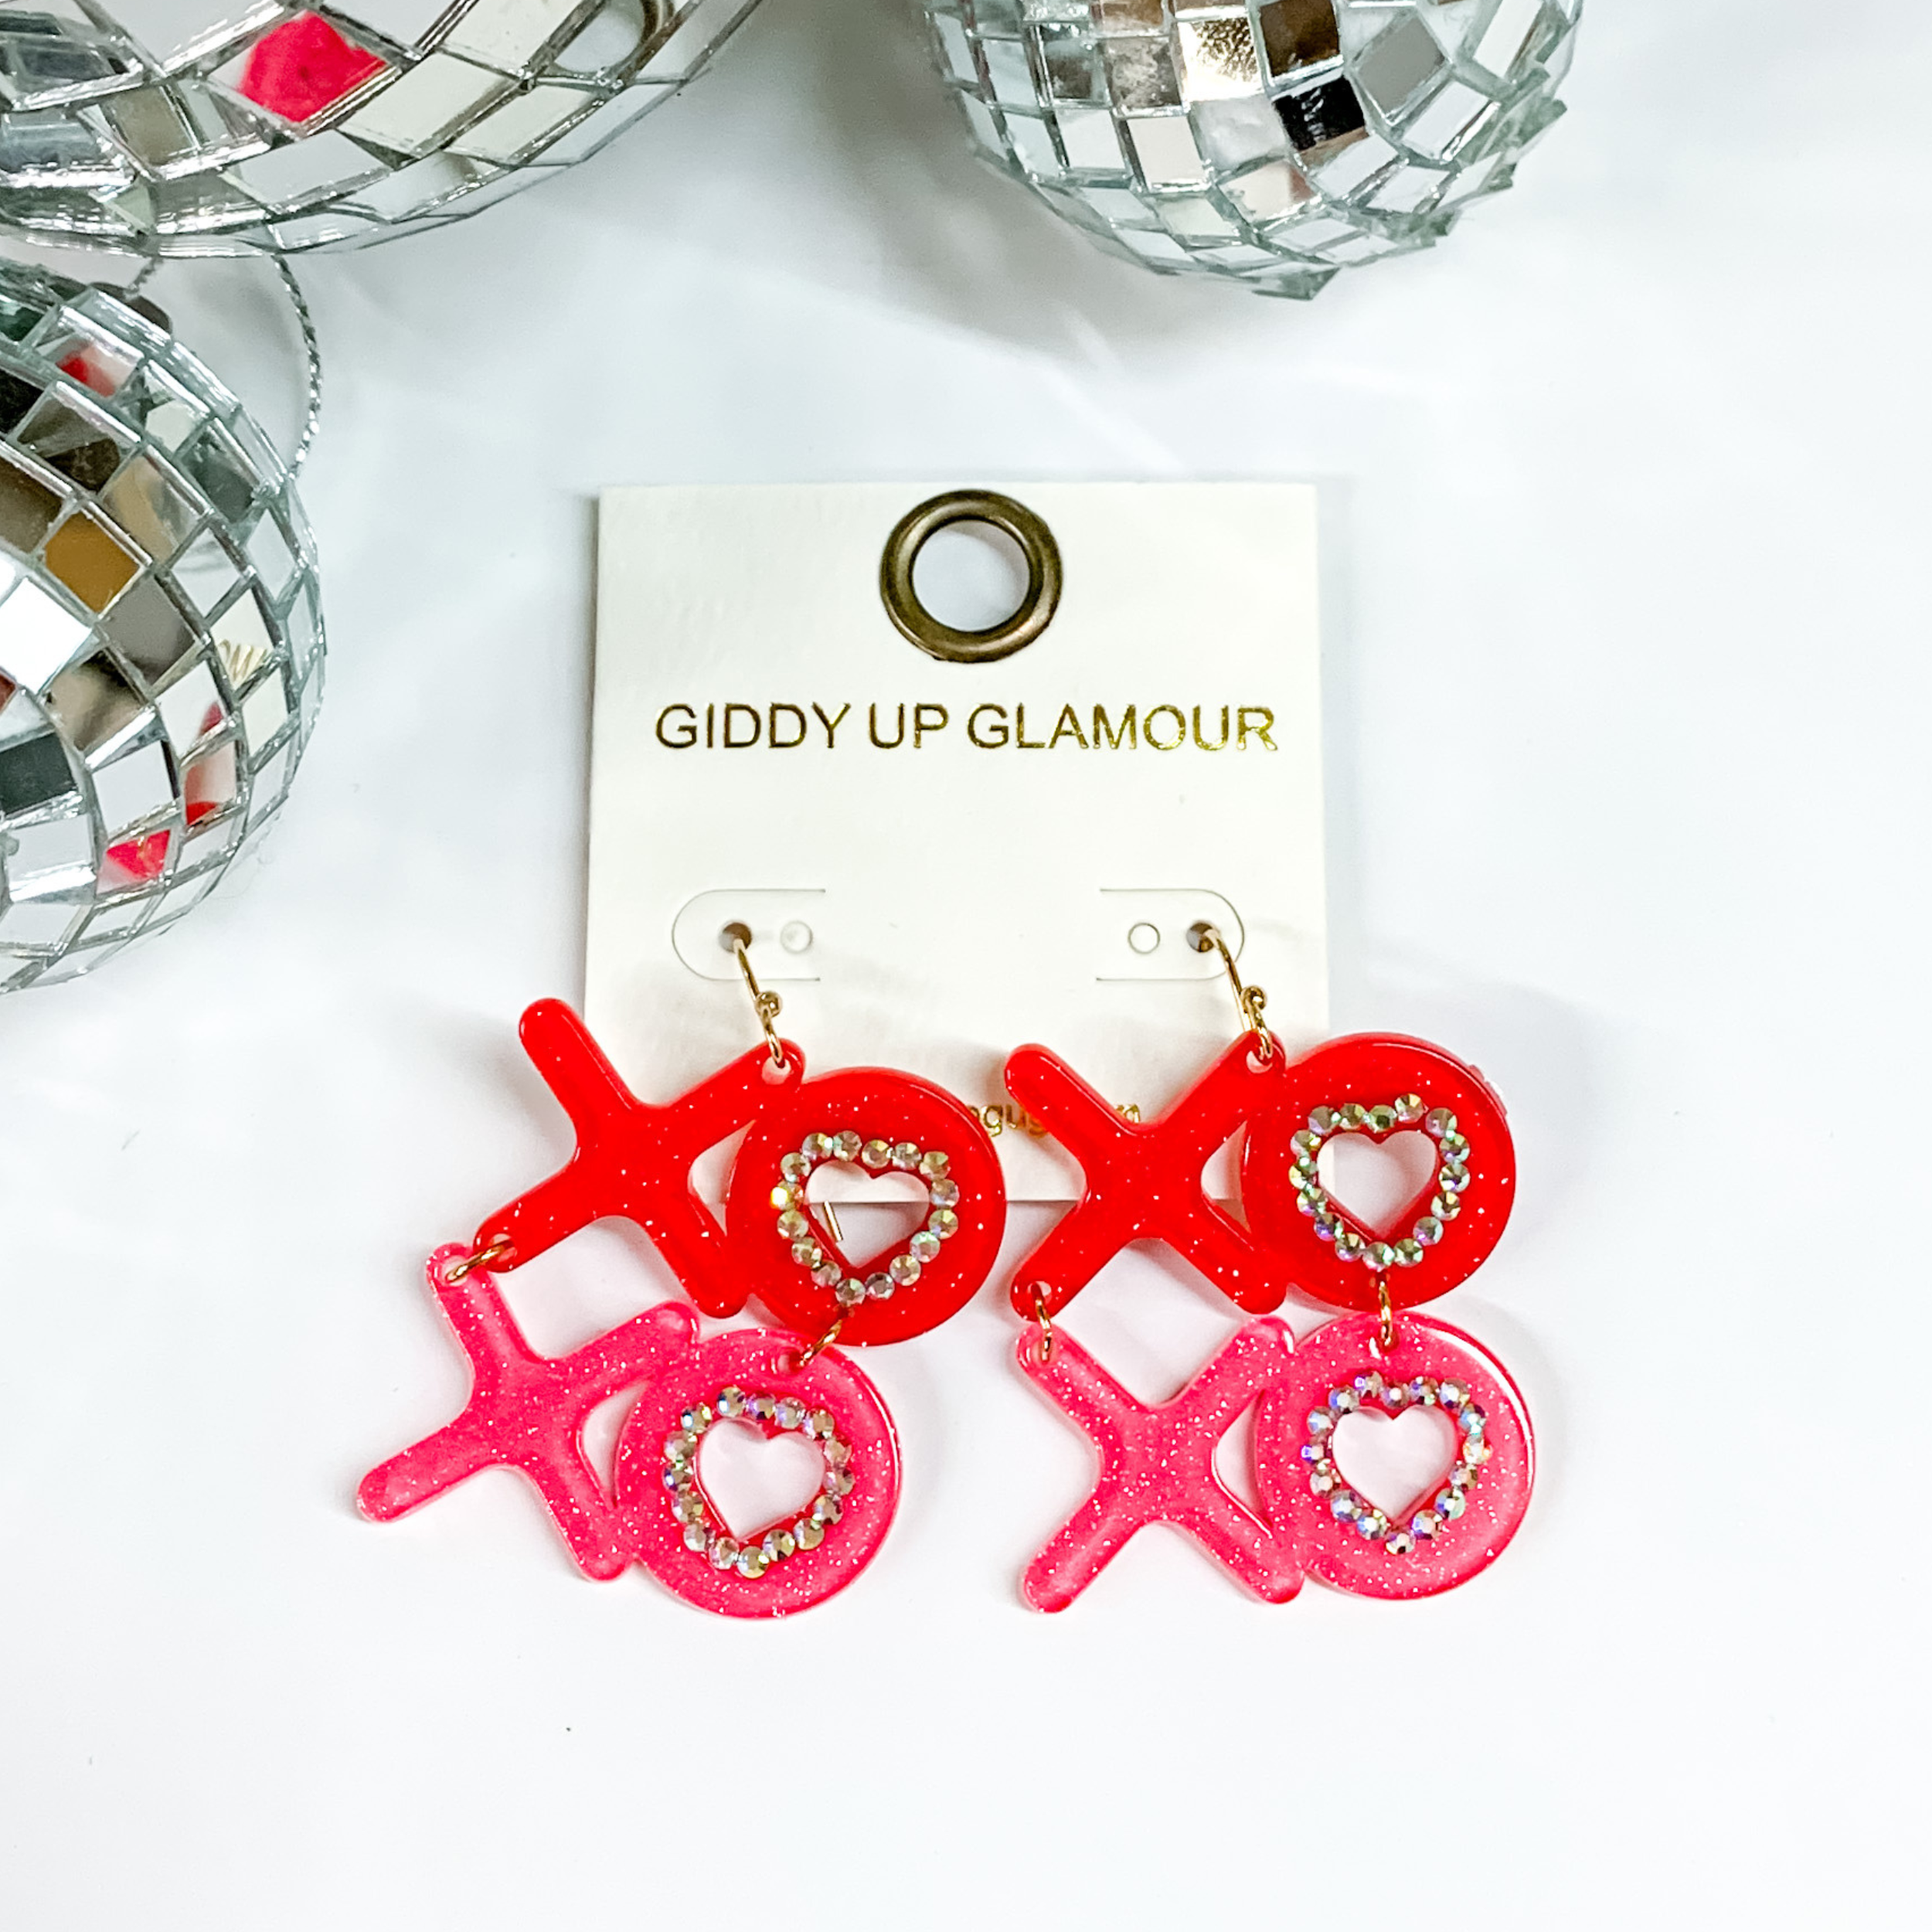 Festive Valentines Day XOXO block letter earrings in red and pink with crystals around the O in XO. Earrings are placed on a white background with silver disco balls  at the top. 